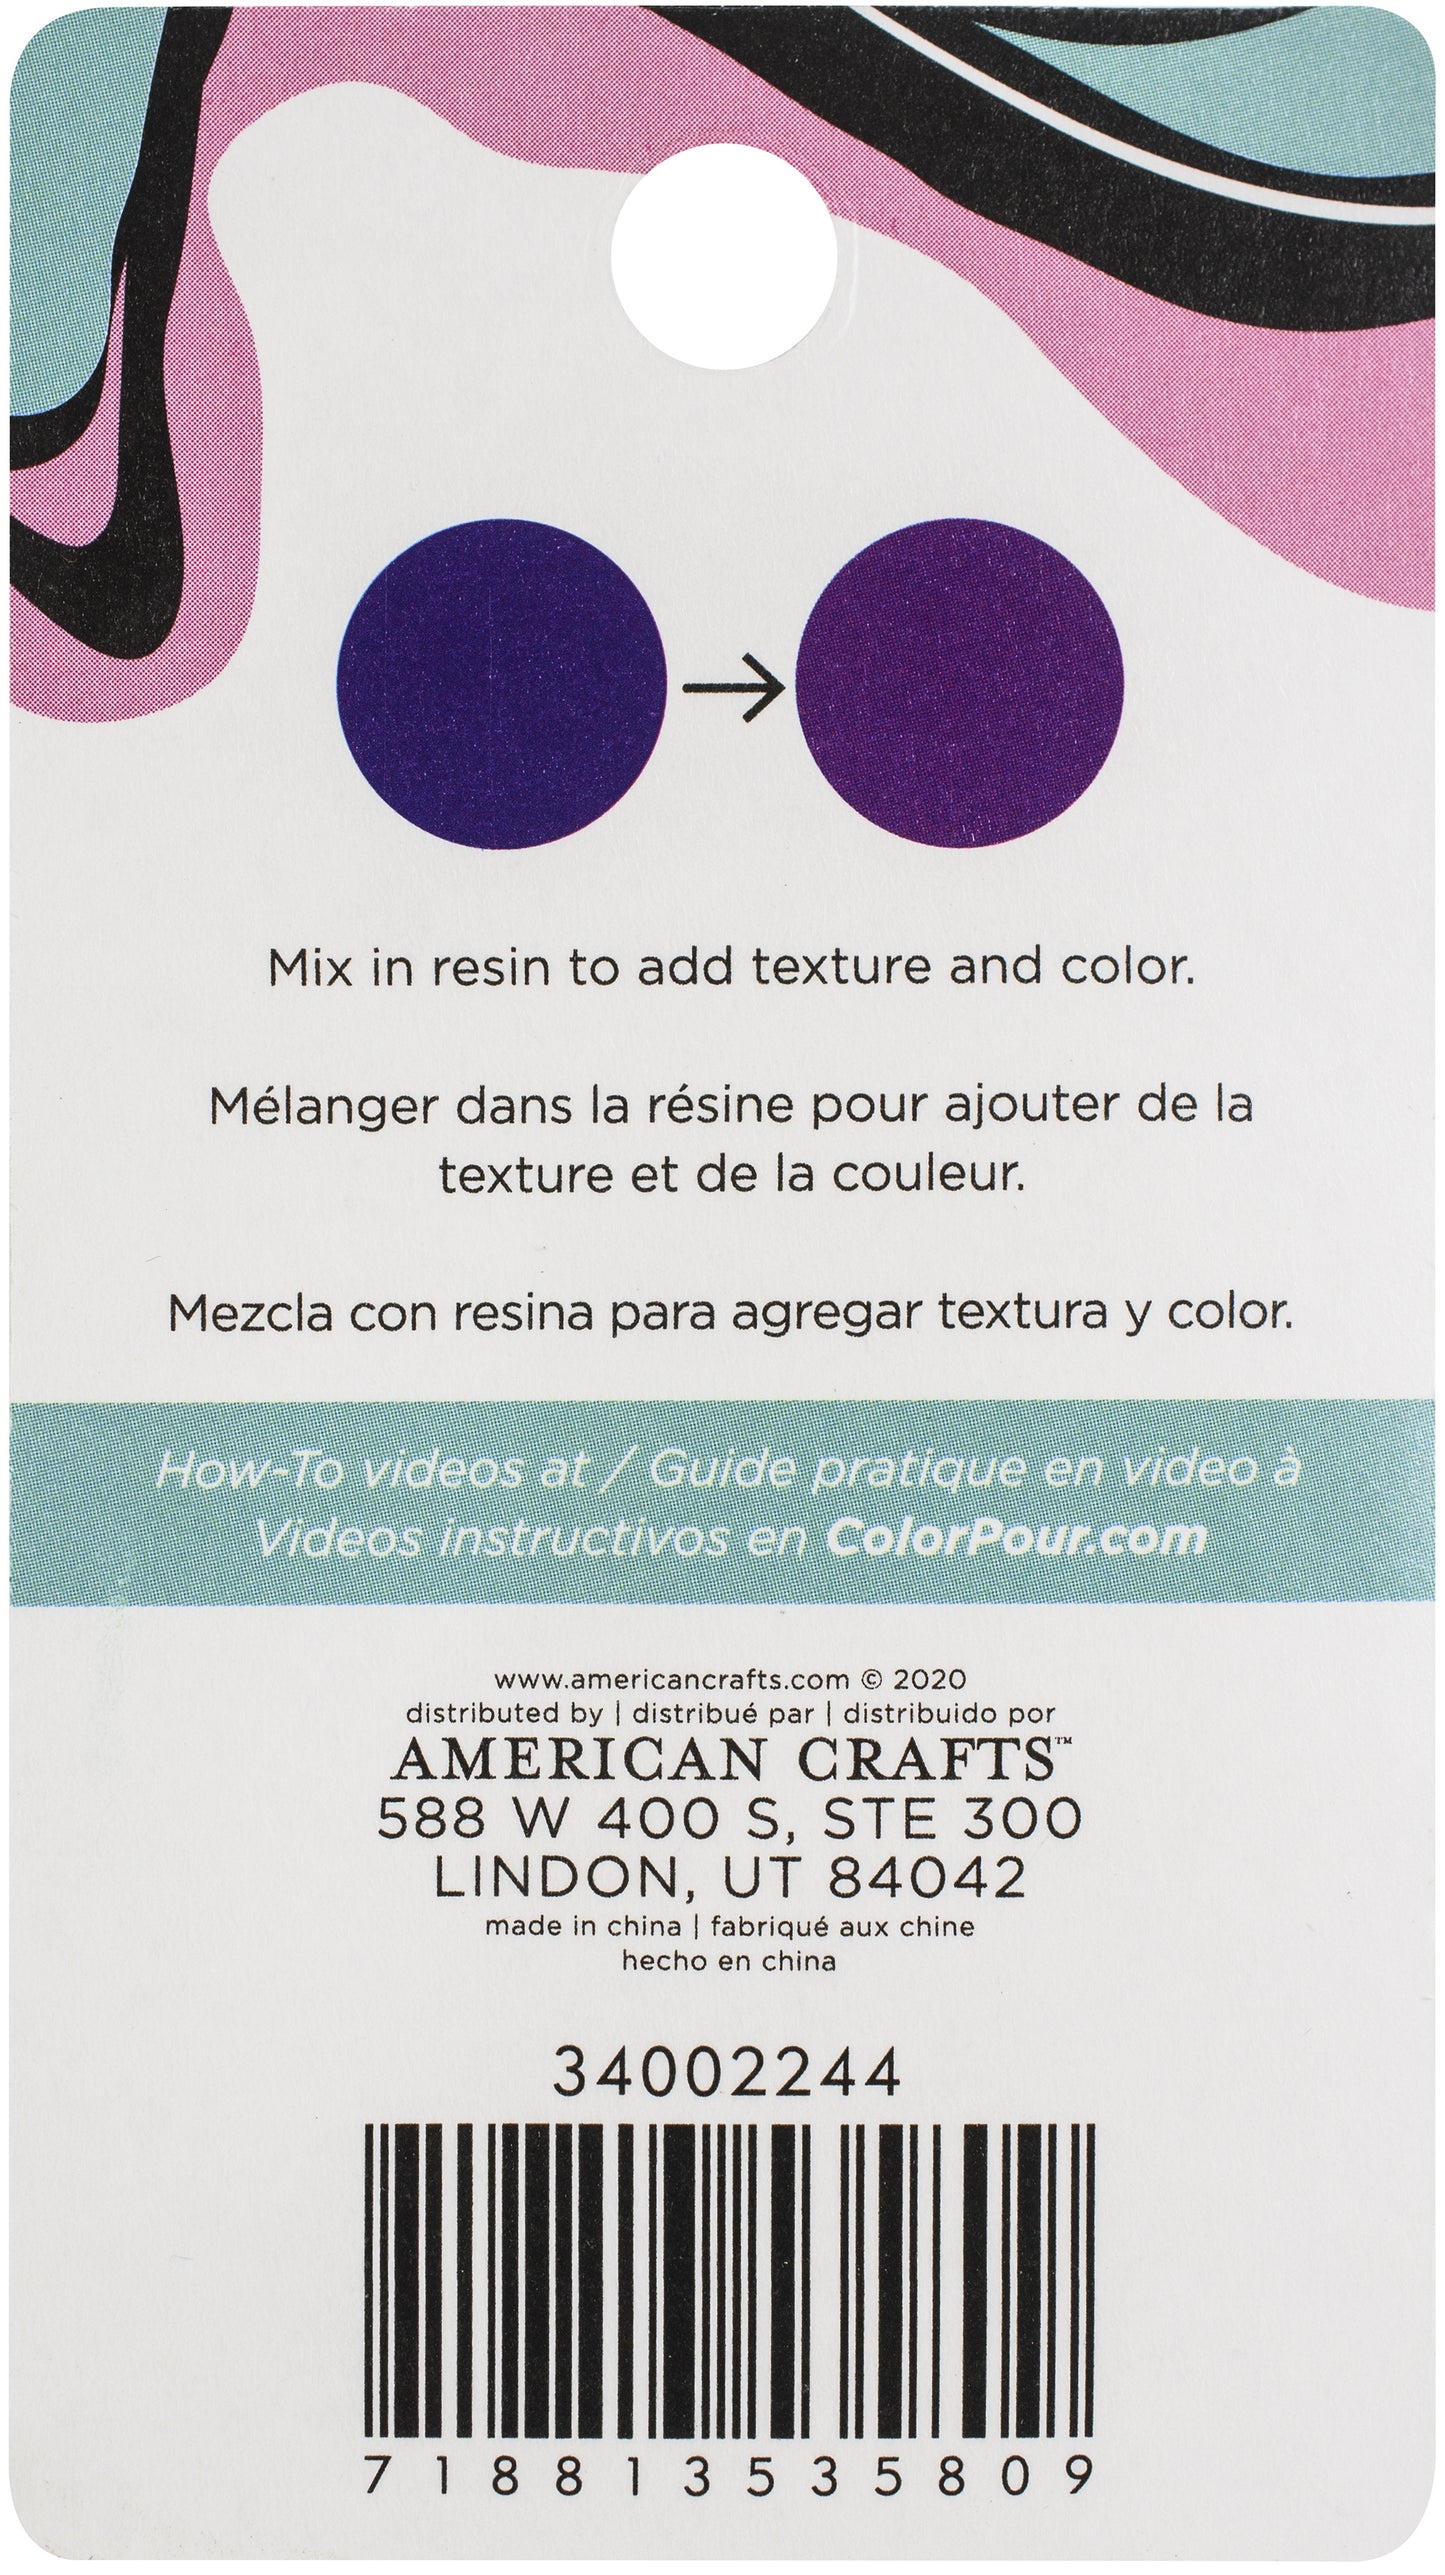 American Crafts Color Pour Thermal Powder 12oz-Blue To Purple